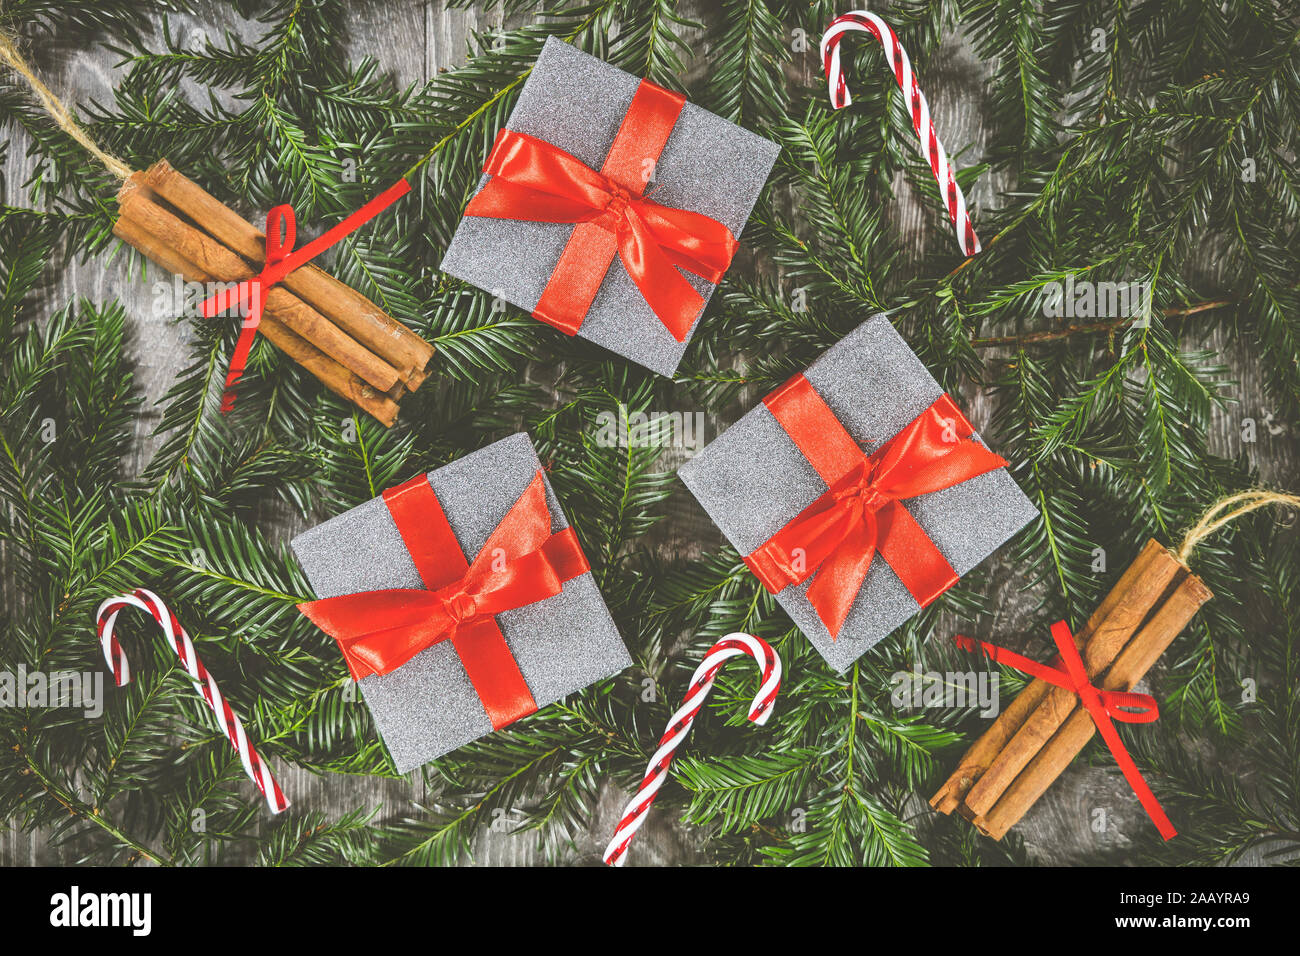 Three Christmas presents sat on the branches of a Christmas tree along side candy cane and cinnamon stick decorations Stock Photo